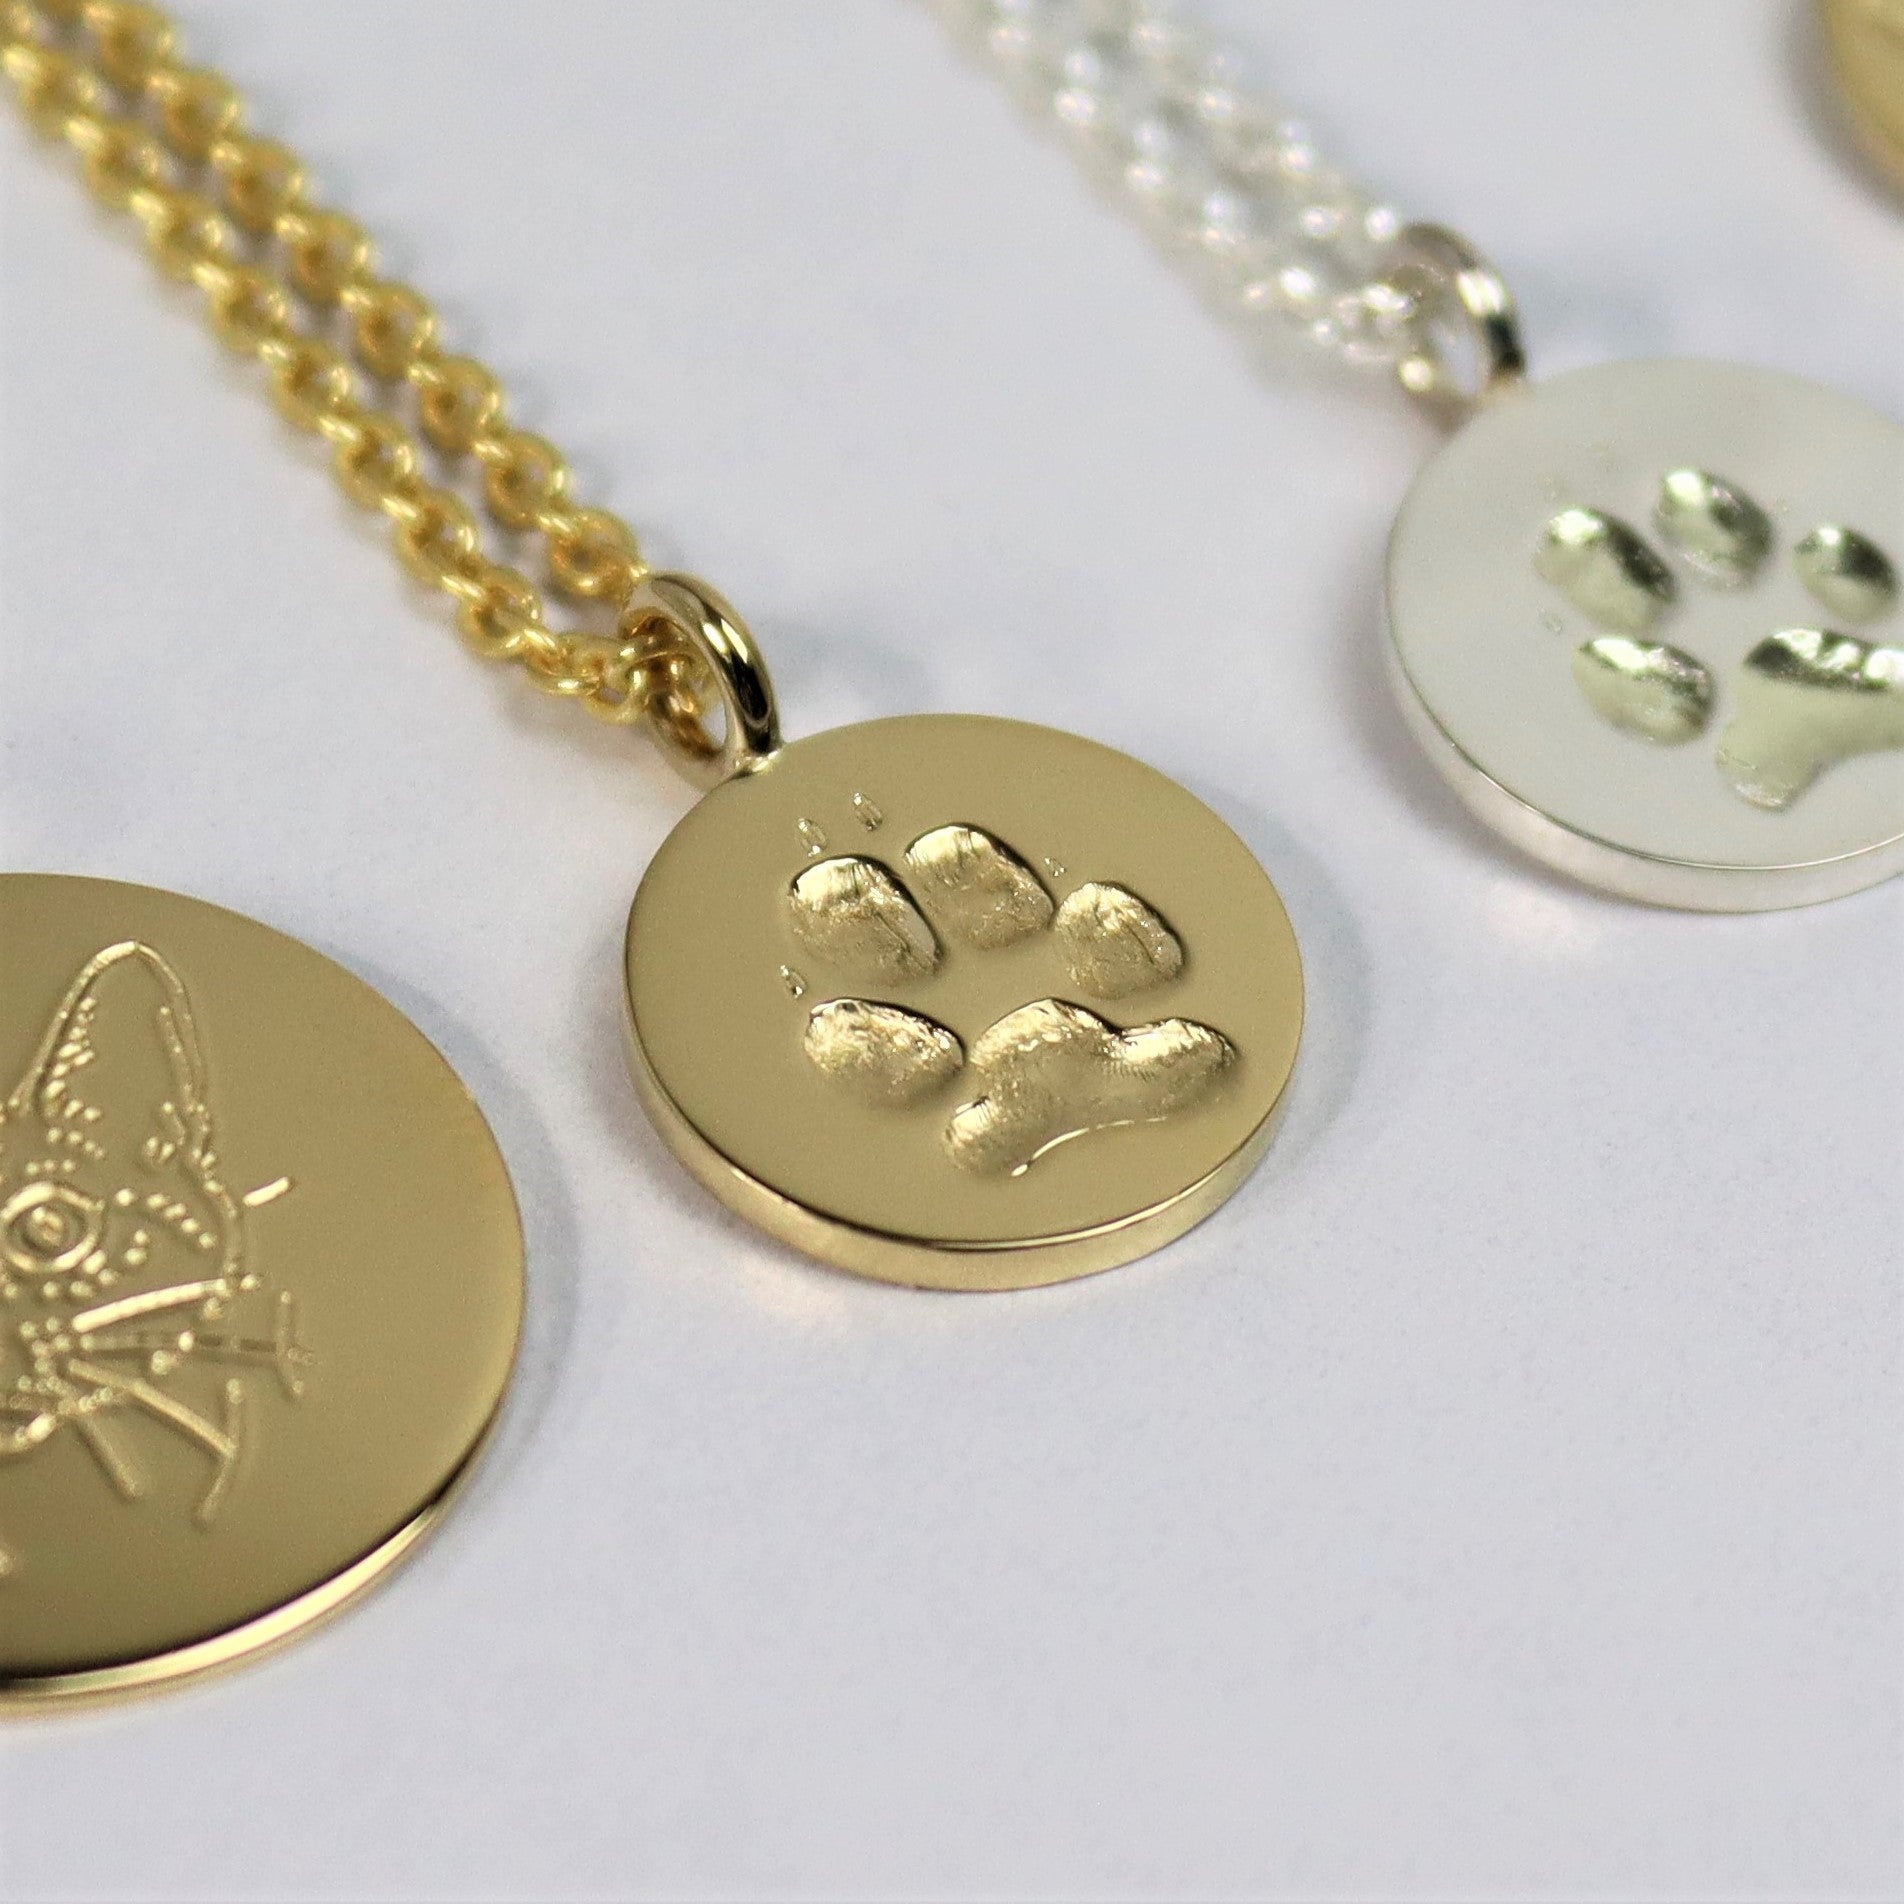 Your pet's actual paw print custom personalized pendant and puffed heart  charm gold fill necklace - Various diameters - Pet memorial jewelry